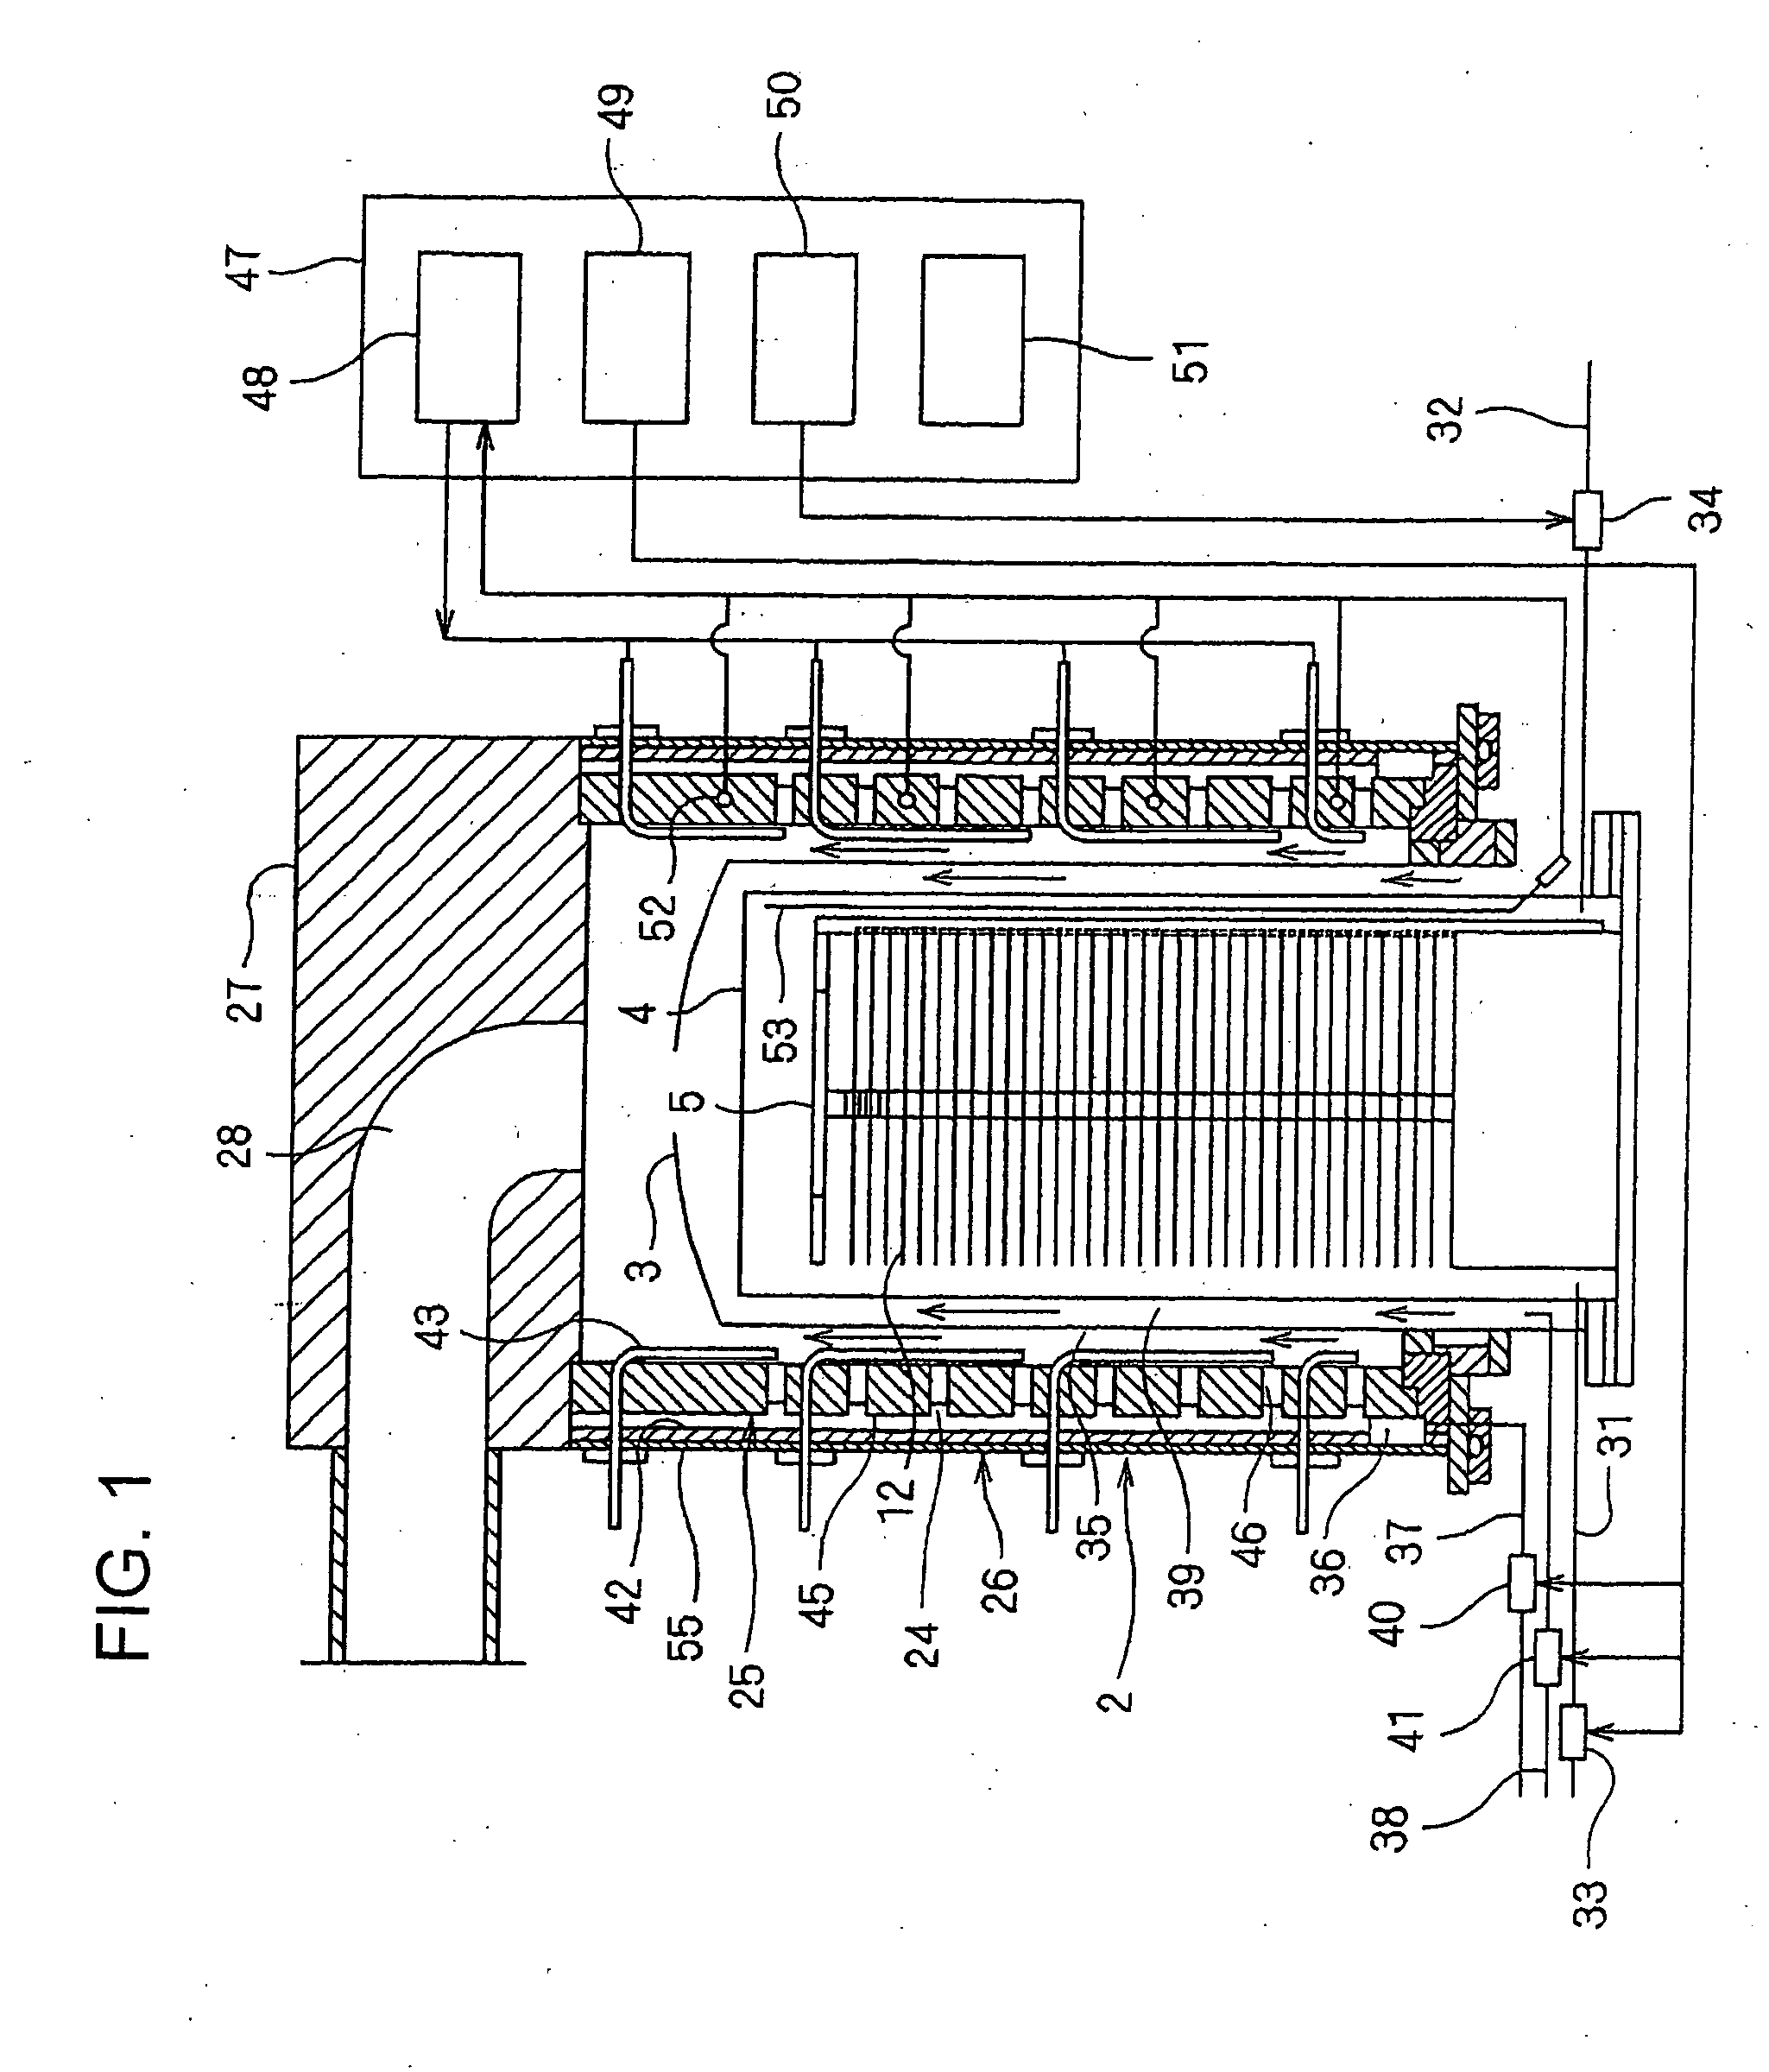 Substrate processing apparatus, heating apparatus for use in the same, method of manufacturing semiconductors with those apparatuses, and heating element supporting structure